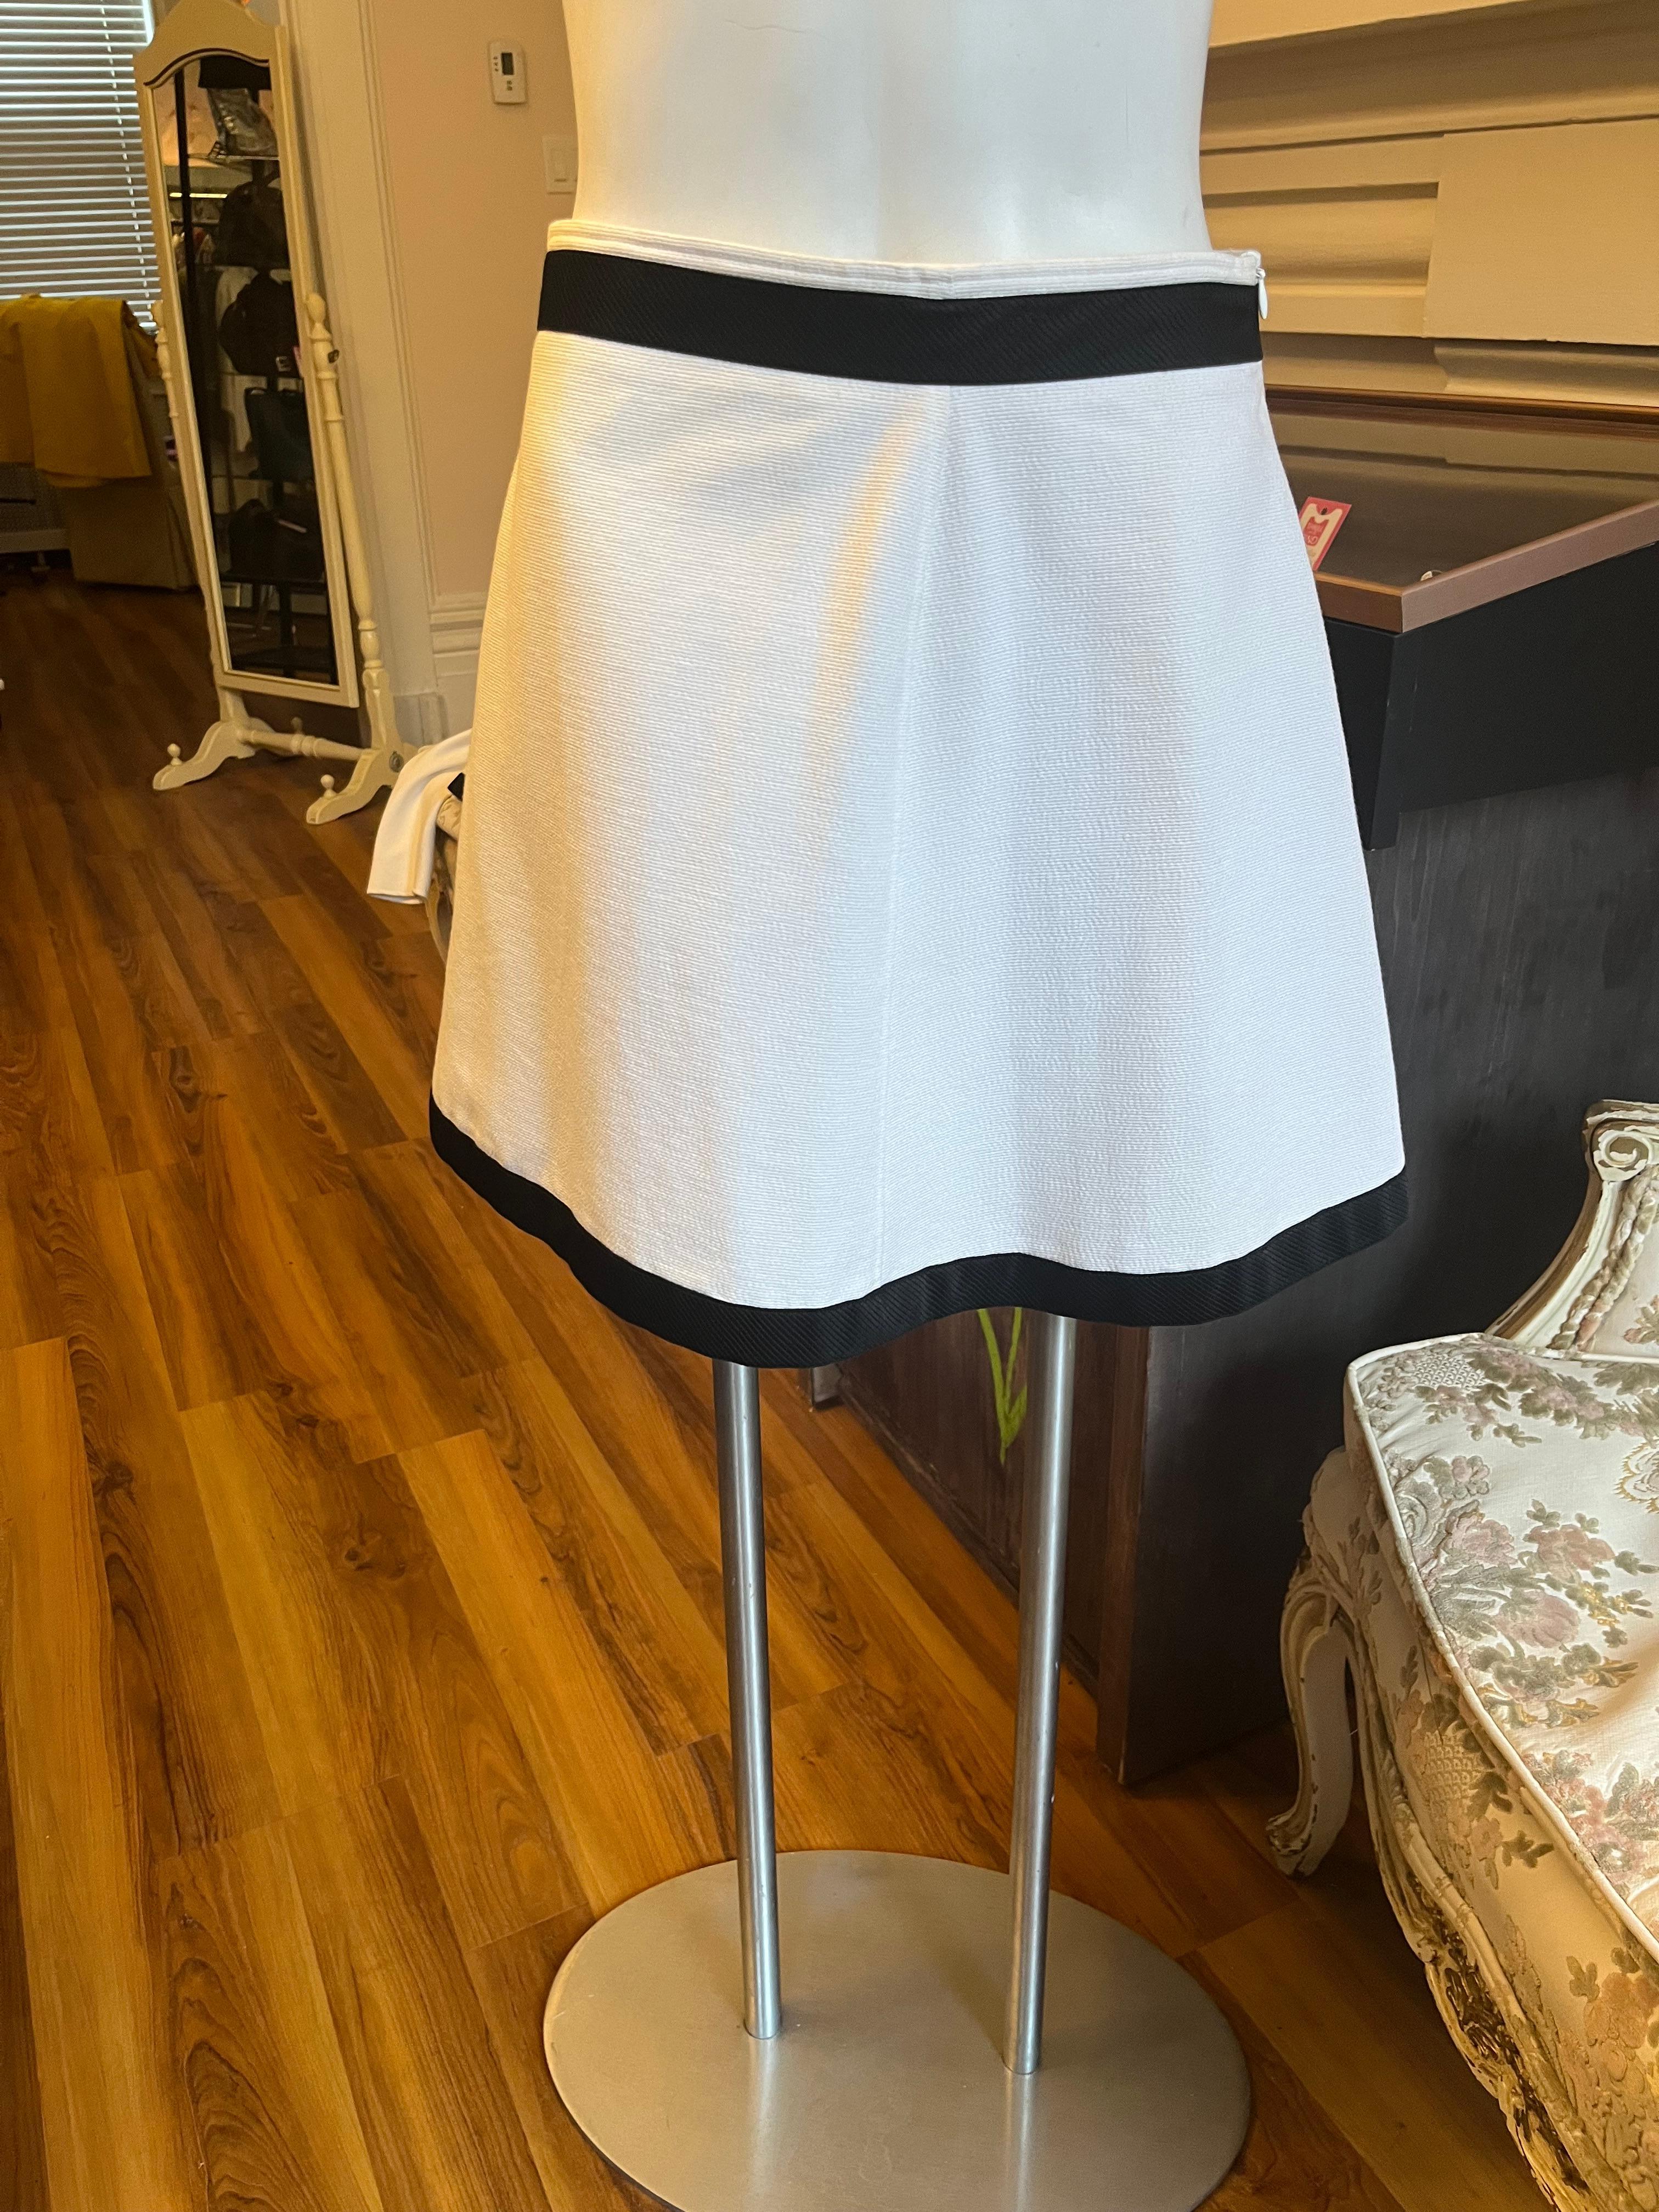 1960s Andre Courreges Skirt Suit (42 fr) In Excellent Condition For Sale In Port Hope, ON